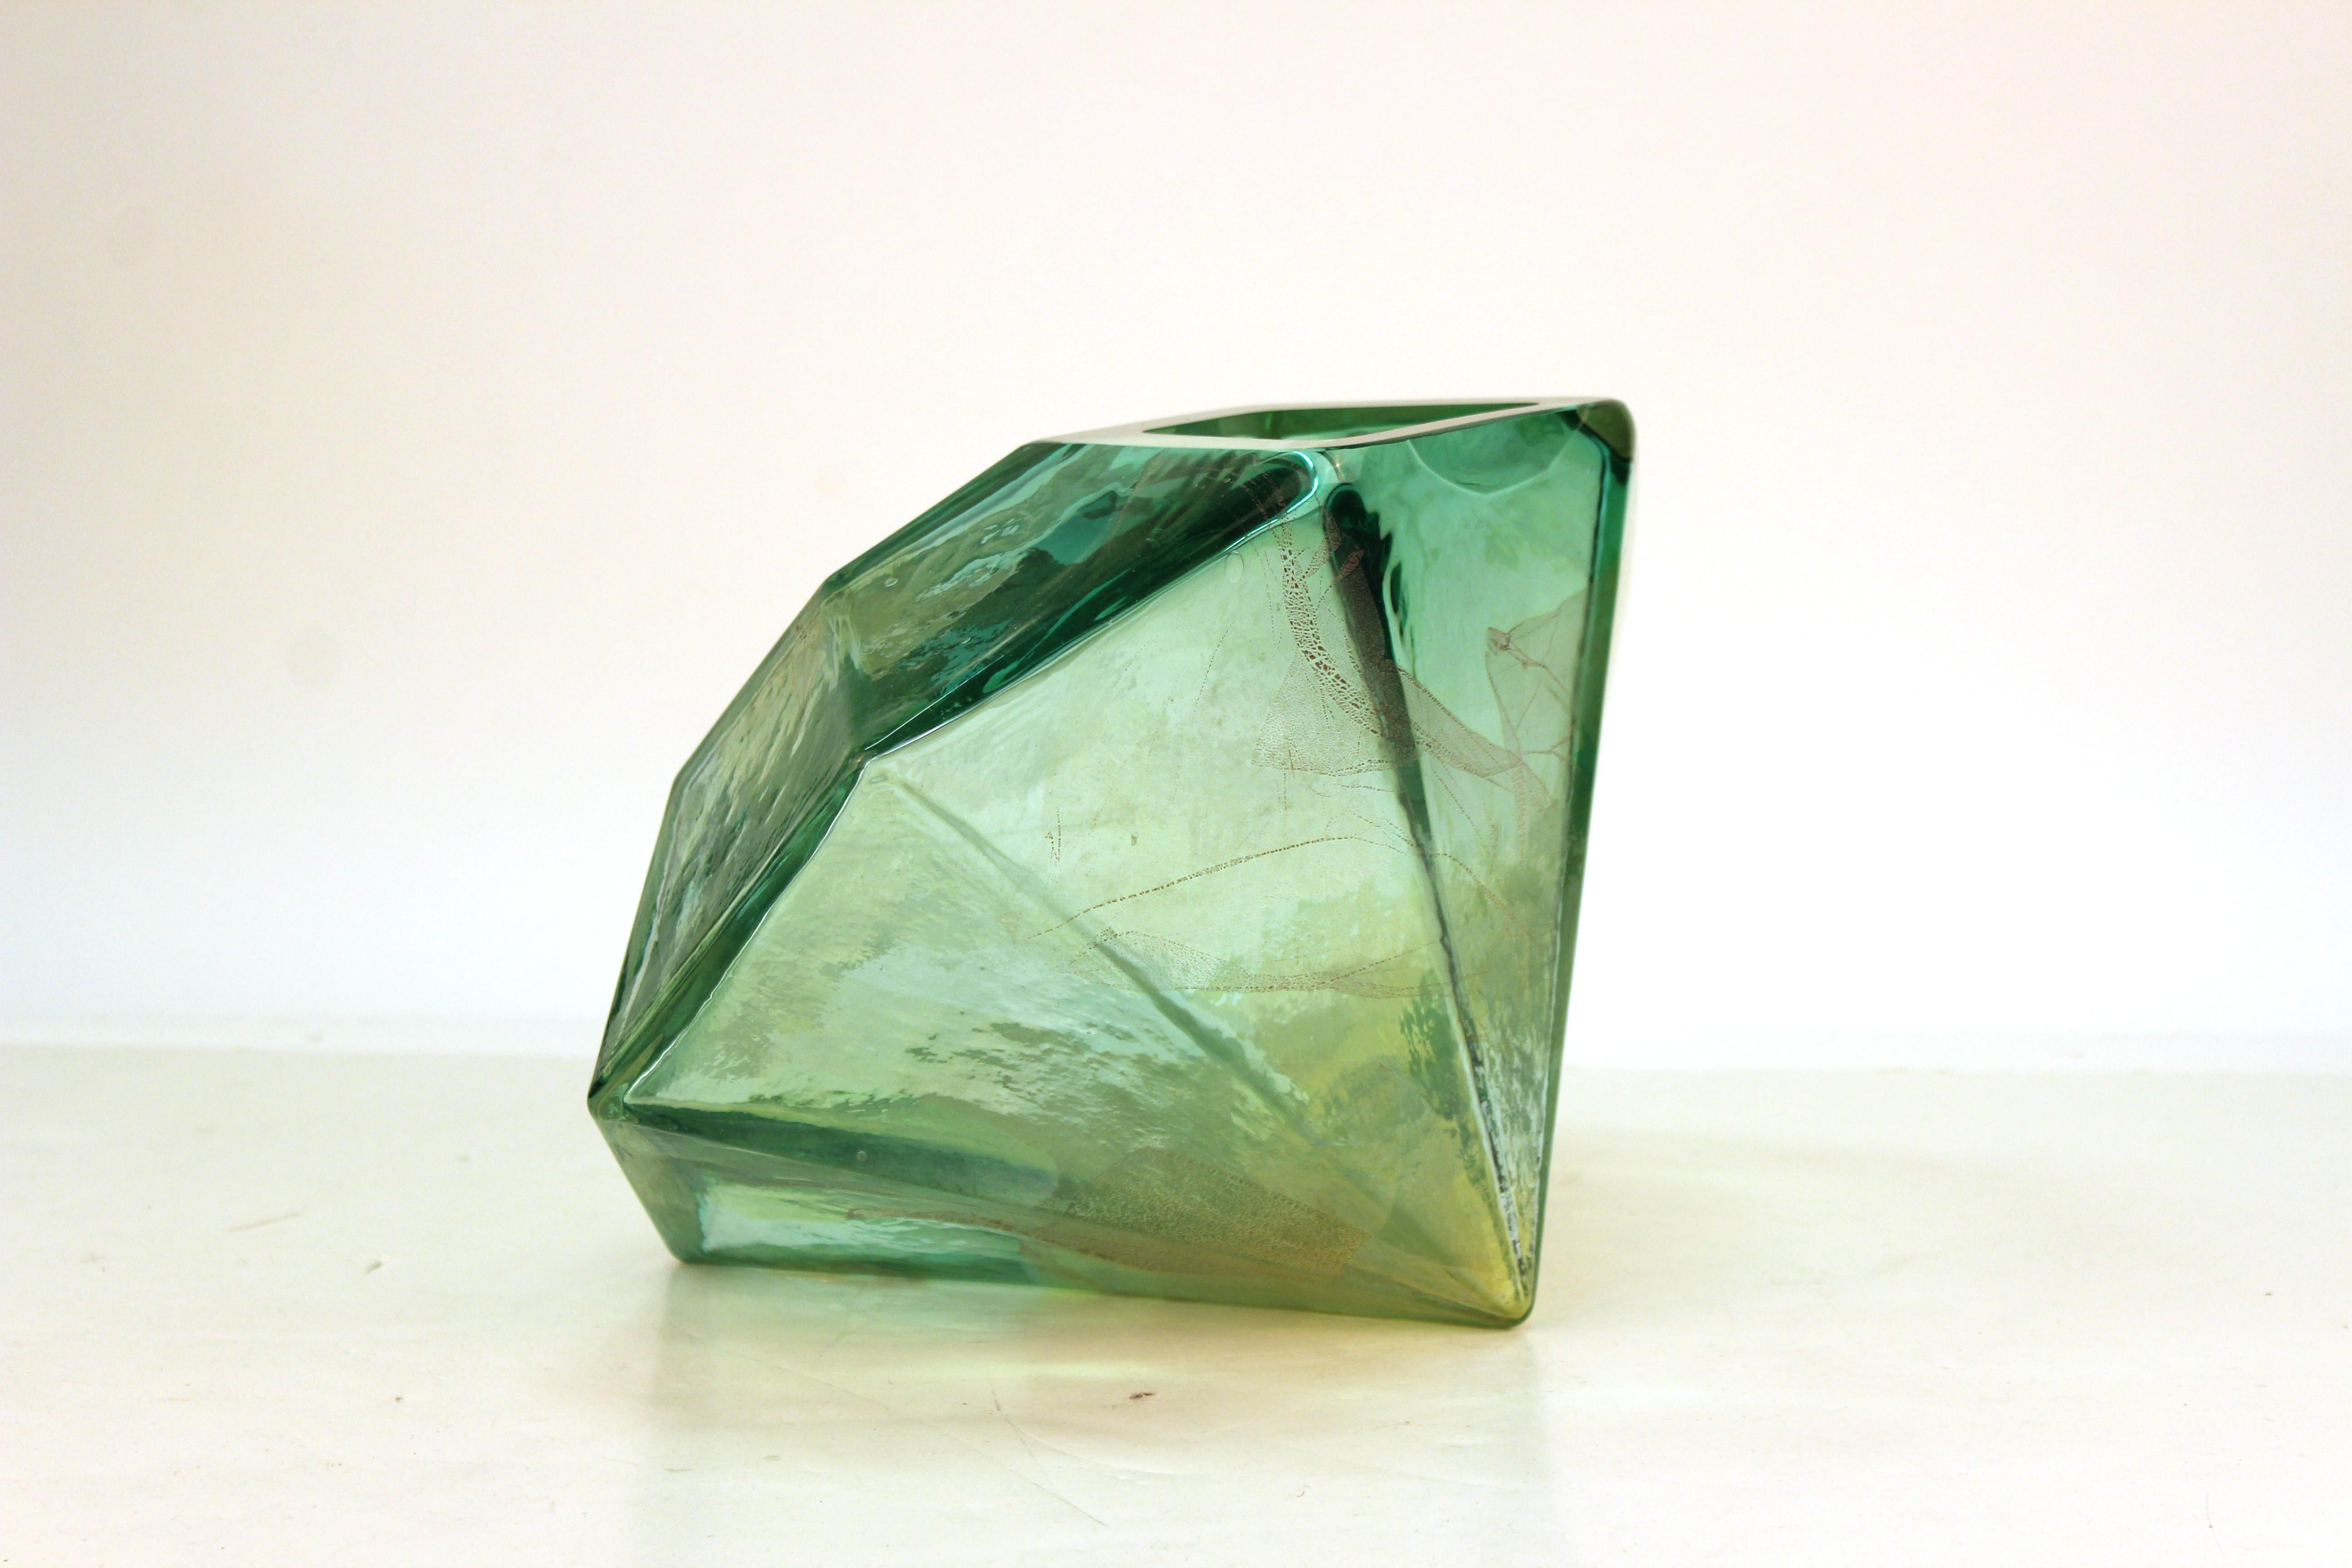 Modern faceted jewel art glass sculpture or vase, created by New-York based artist John Torreano (b. 1941) in the late 20th century. The piece has smokey translucent effects. In great vintage condition.